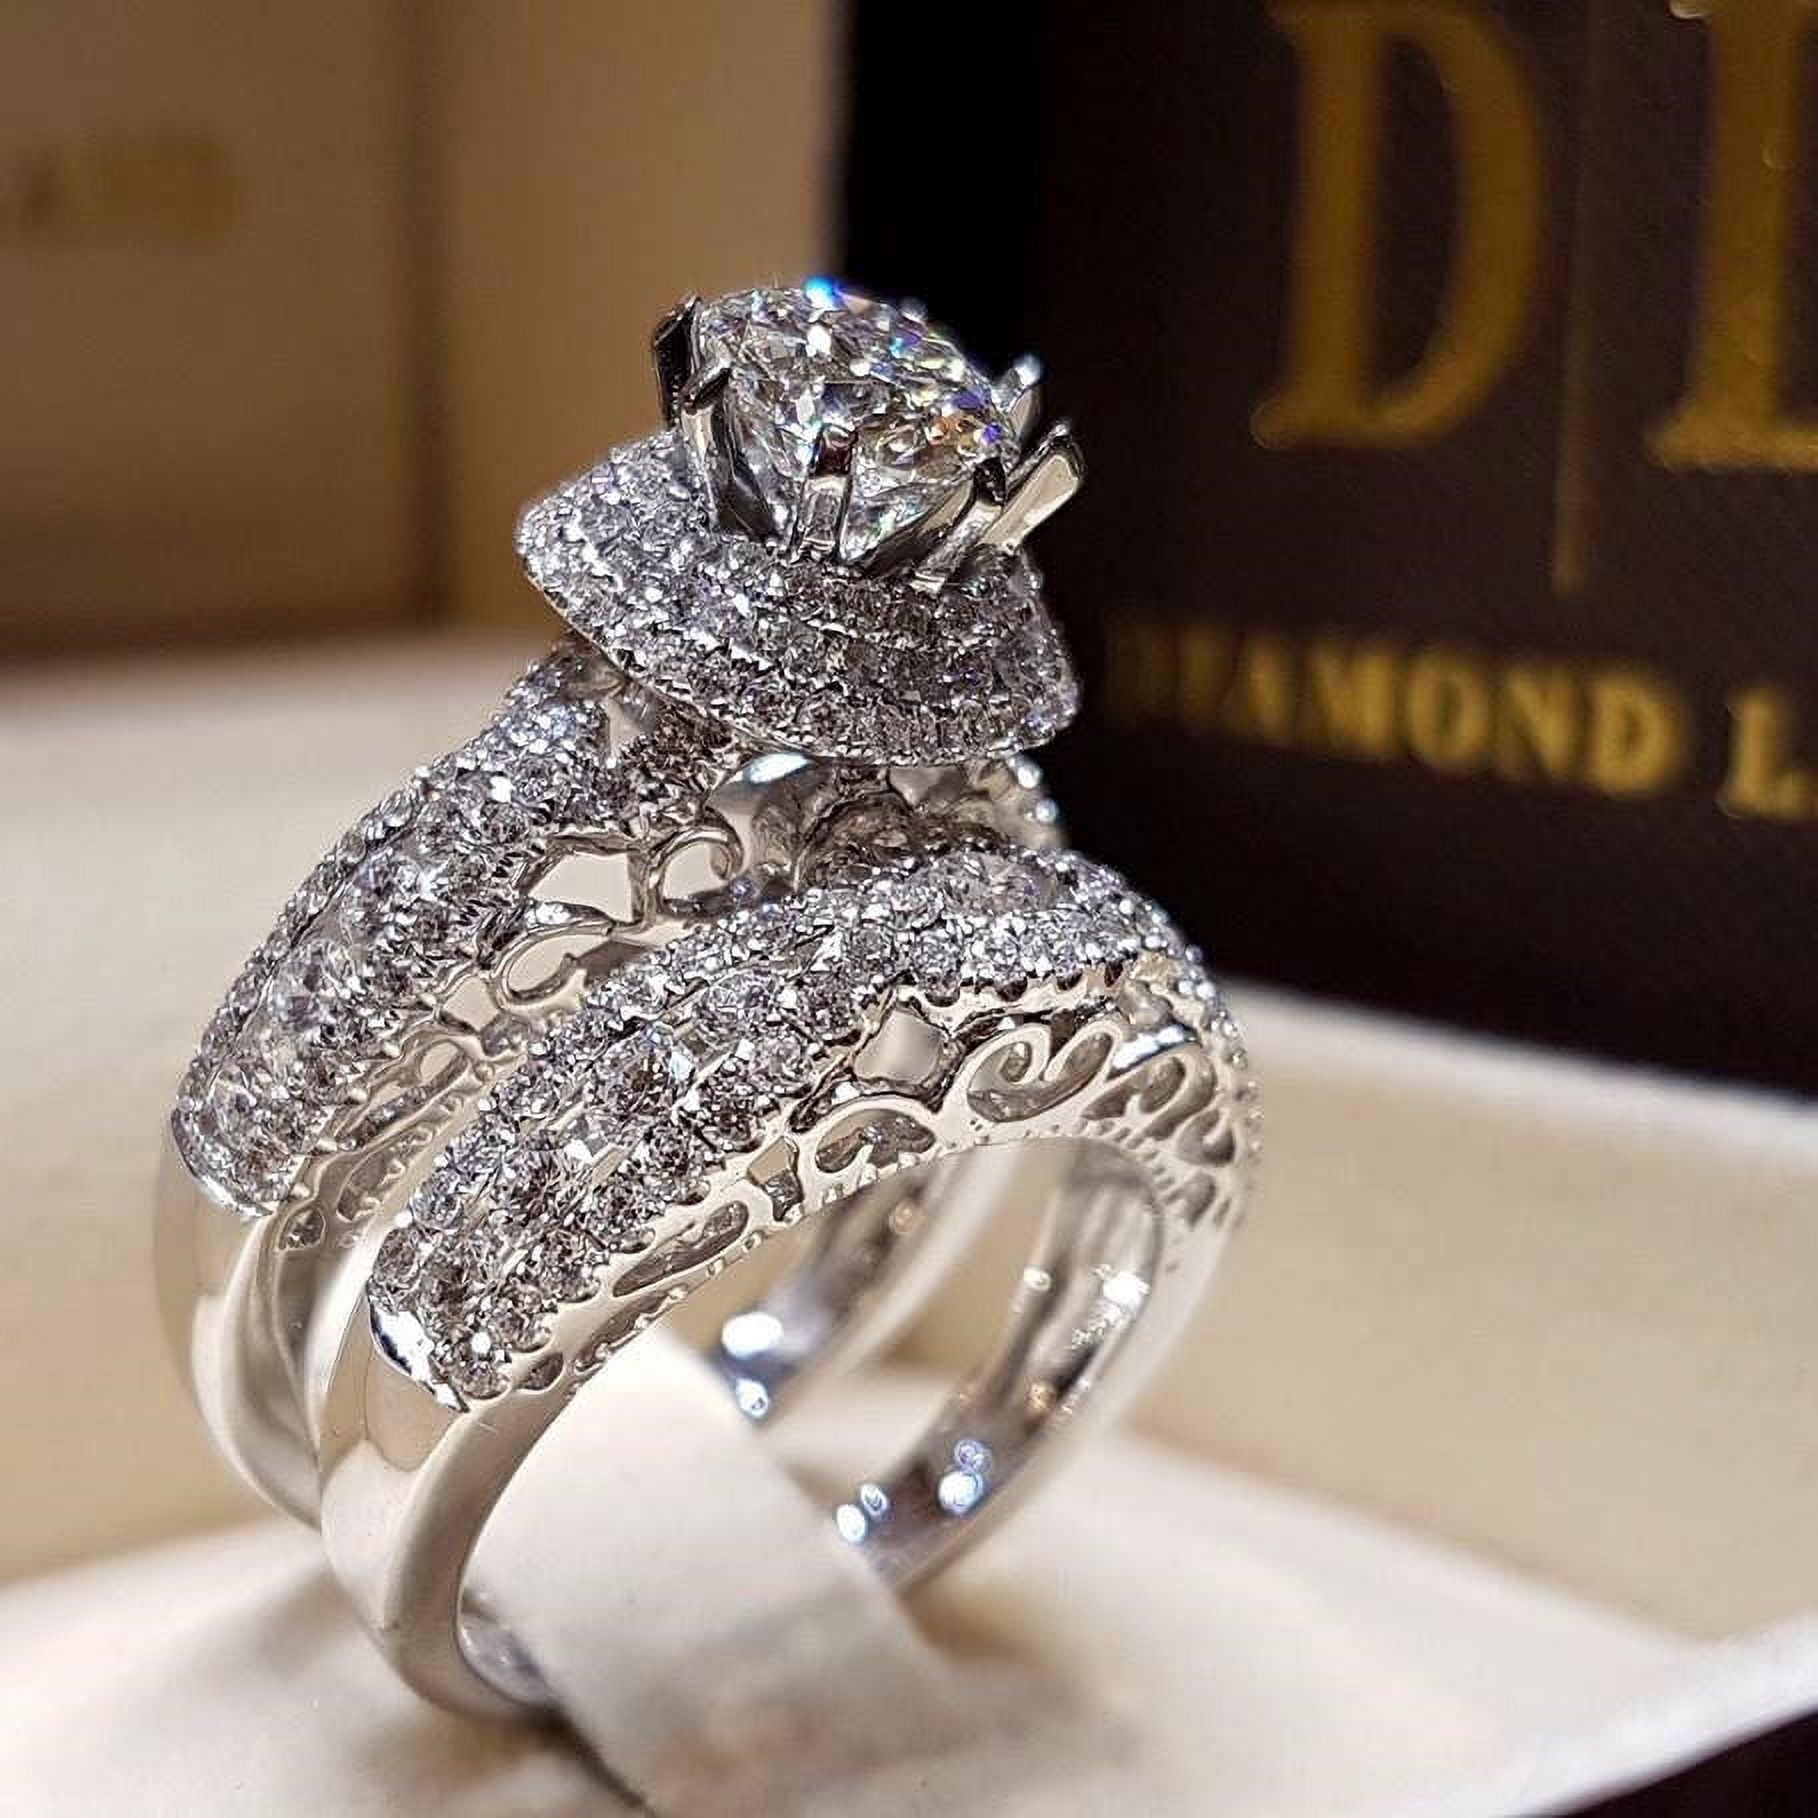 Man-made diamonds are the new engagement ring trend | CNN Business